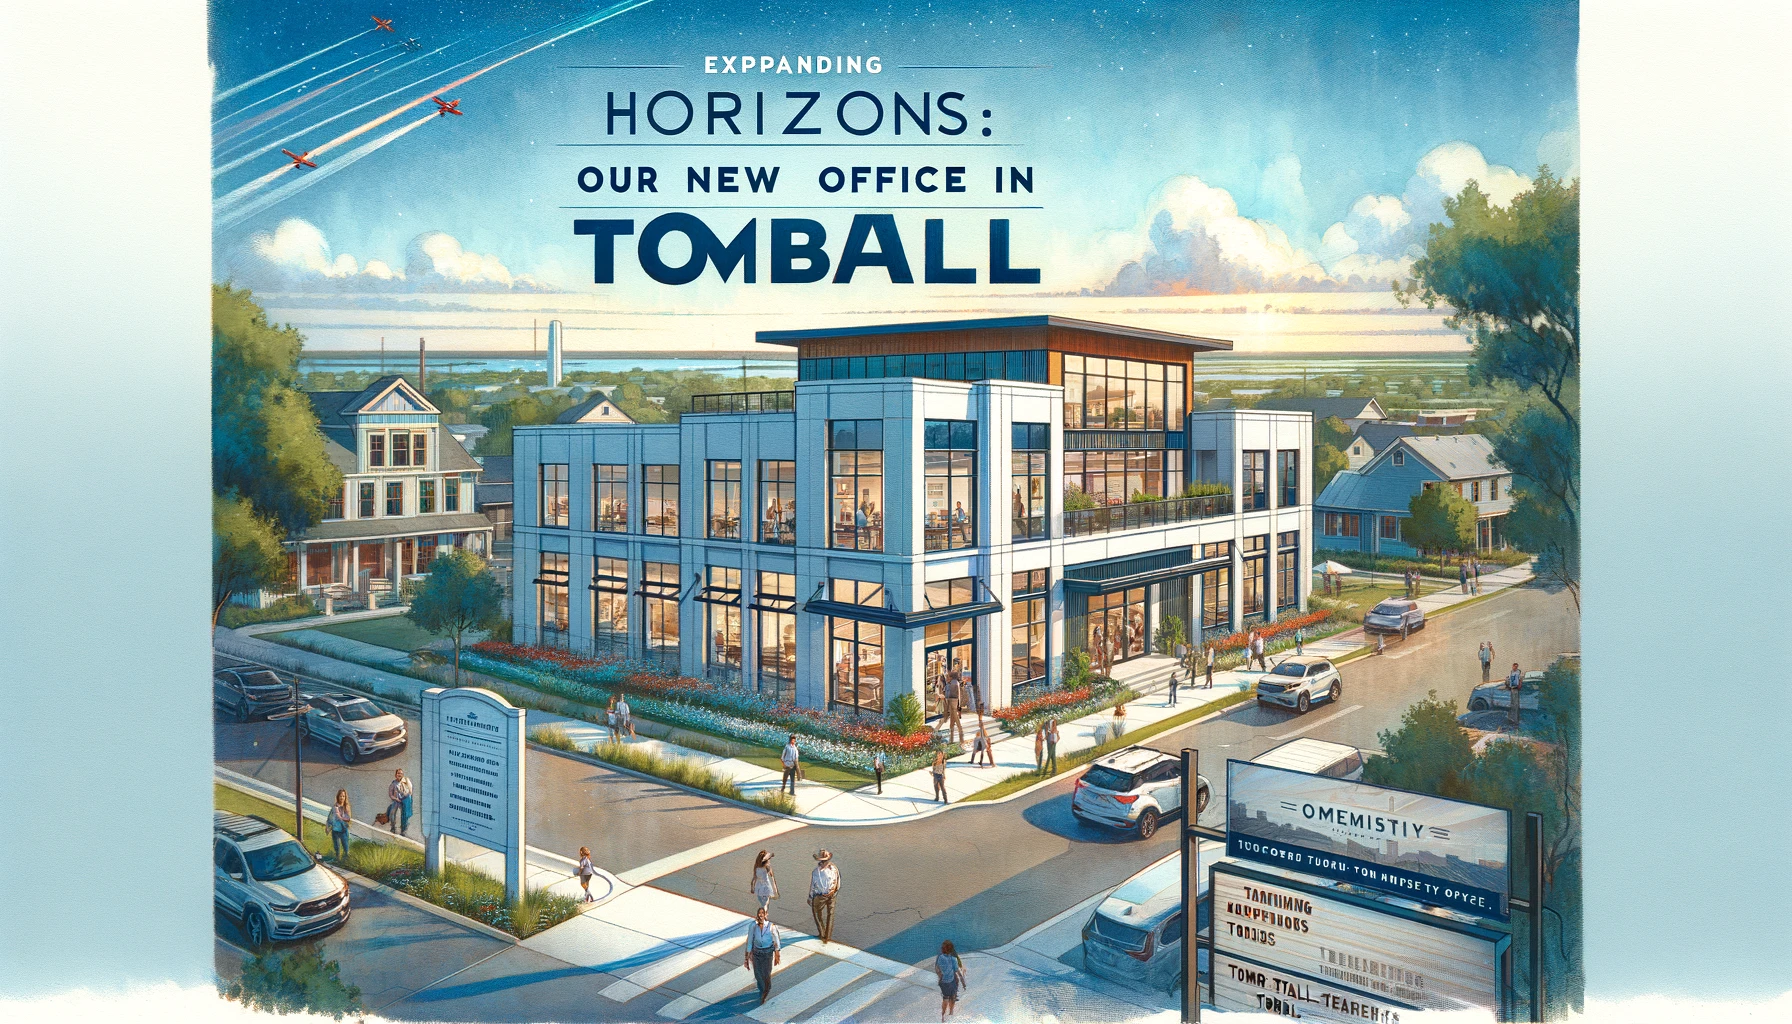 Expanding Horizons: Our New Office in Tomball